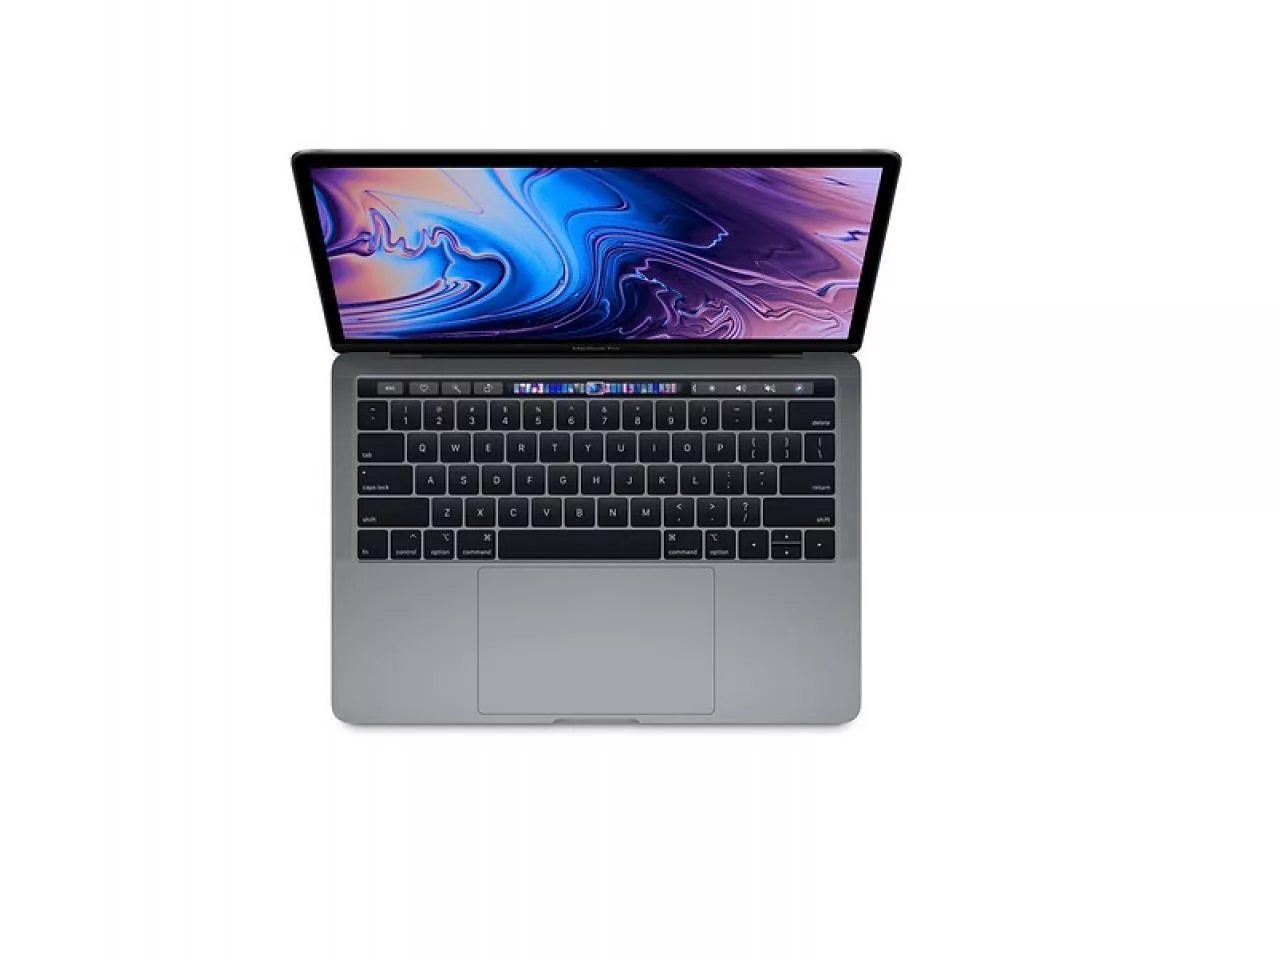 Apple MacBook Pro (13", 2019, Two Thunderbolt 3 ports) space gray, refurbished